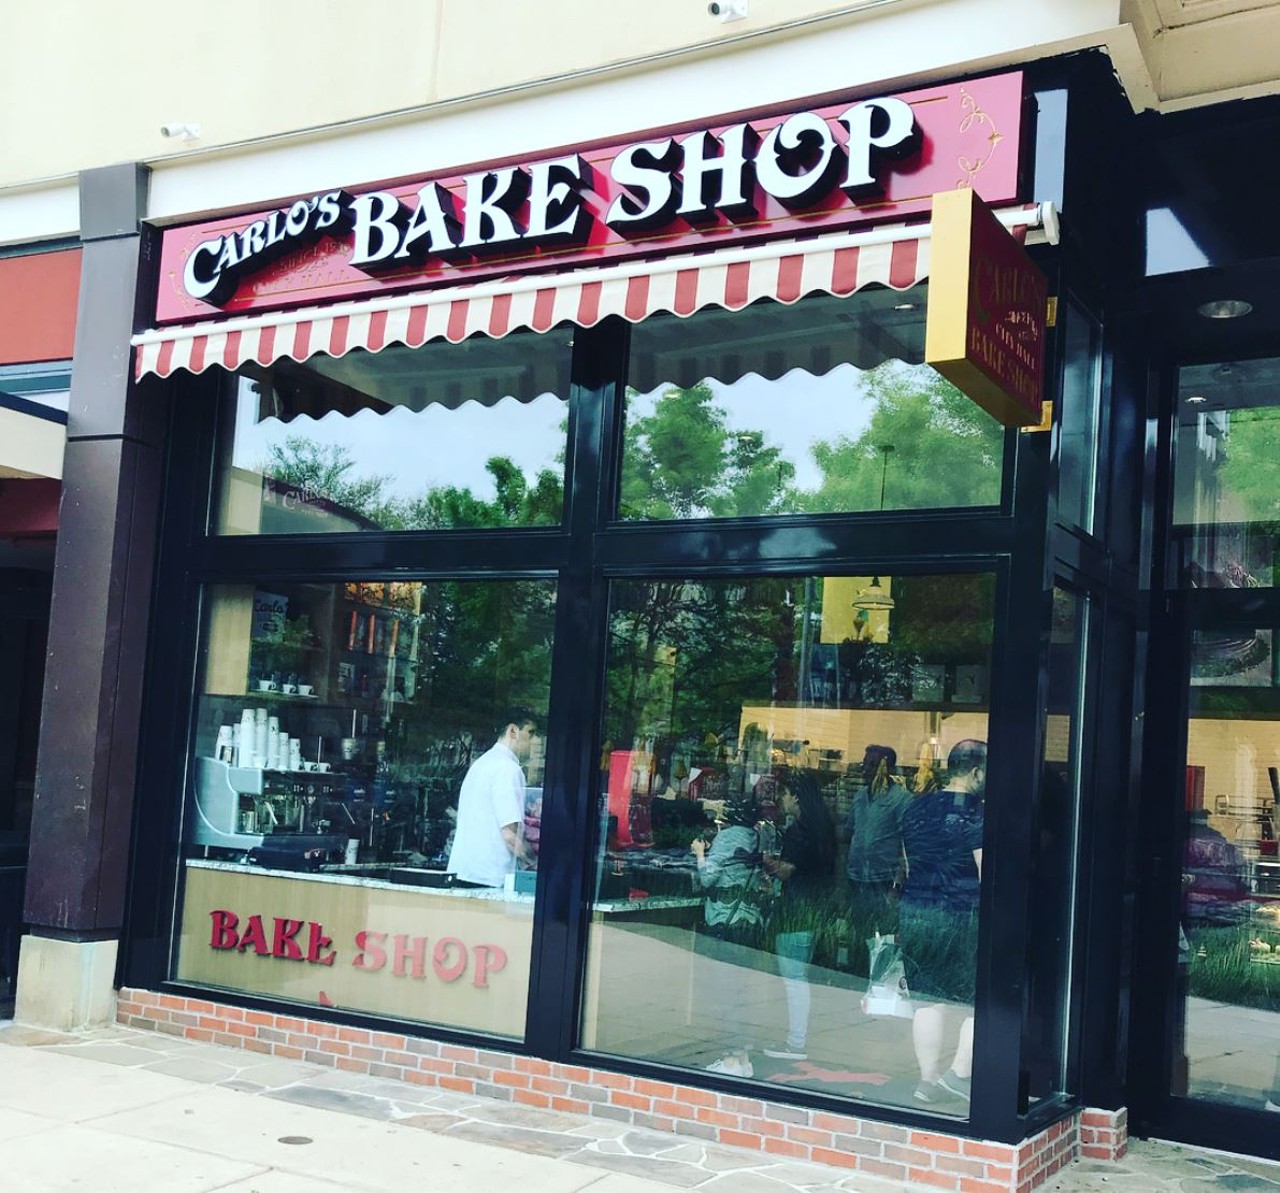 Buddy V’s Ristorante & Carlo’s Bakery
15900 La Cantera Pkwy, (210) 888-0110, carlosbakery.com
Fans of Cake Boss can rejoice: Buddy V’s Ristorante opened at La Cantera and was followed by the opening of Carlo’s Bakery this March.
Photo via Instagram / bolos_dafer